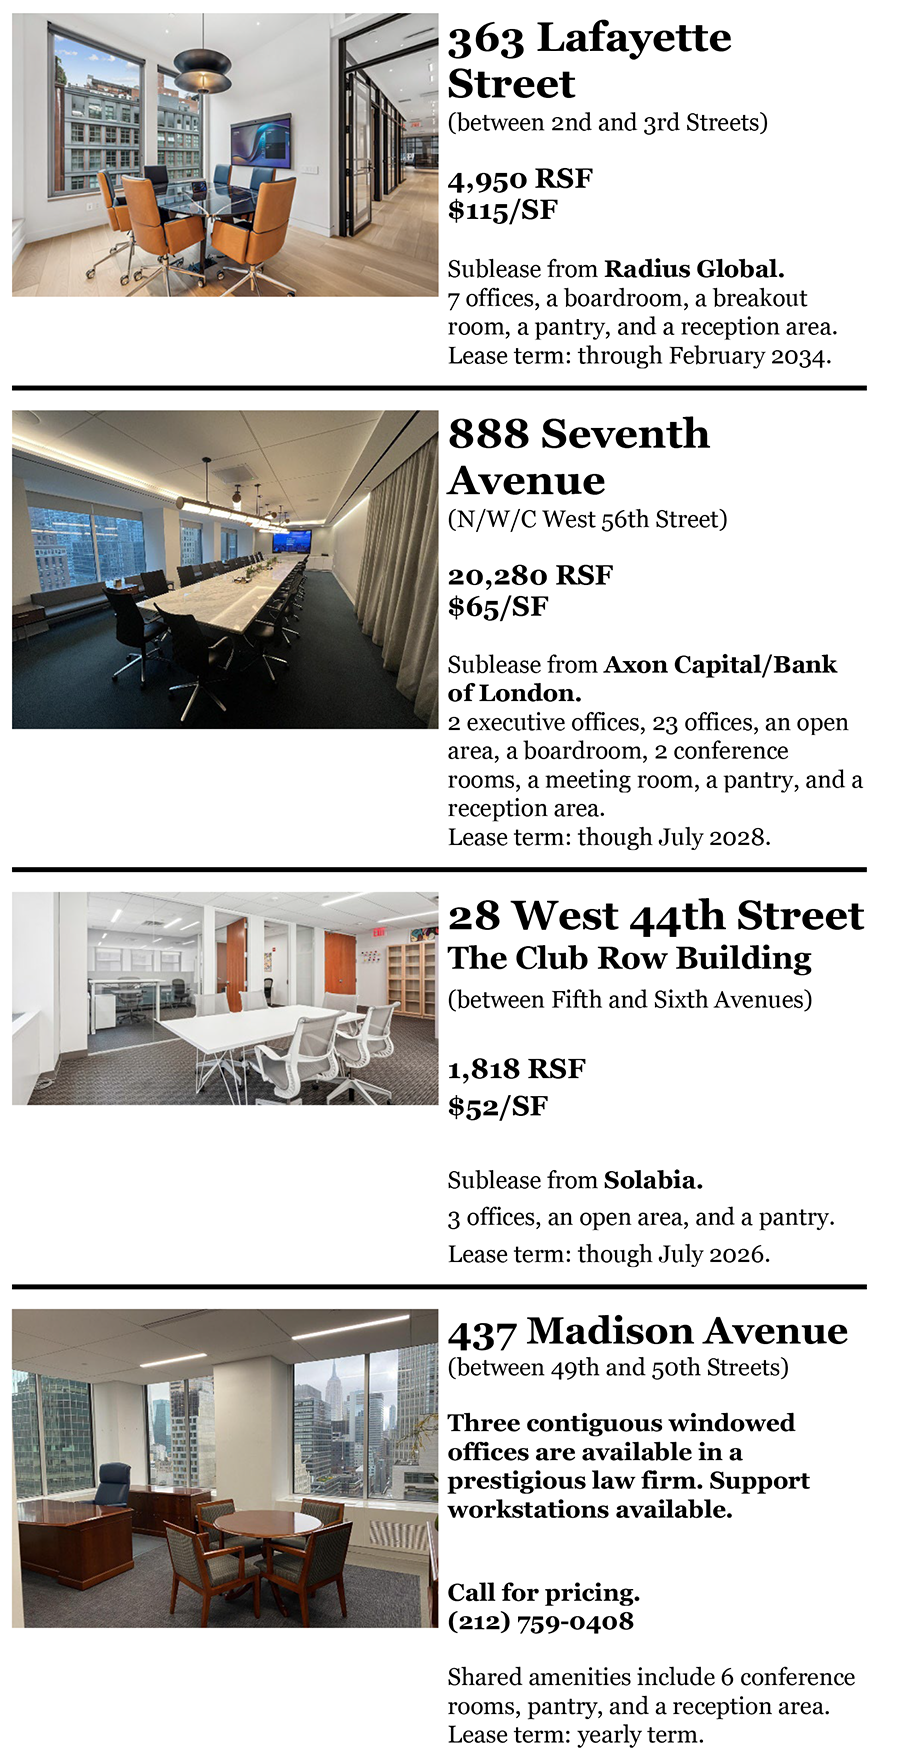 new york city law firm space - law office space nyc - law office sublet nyc